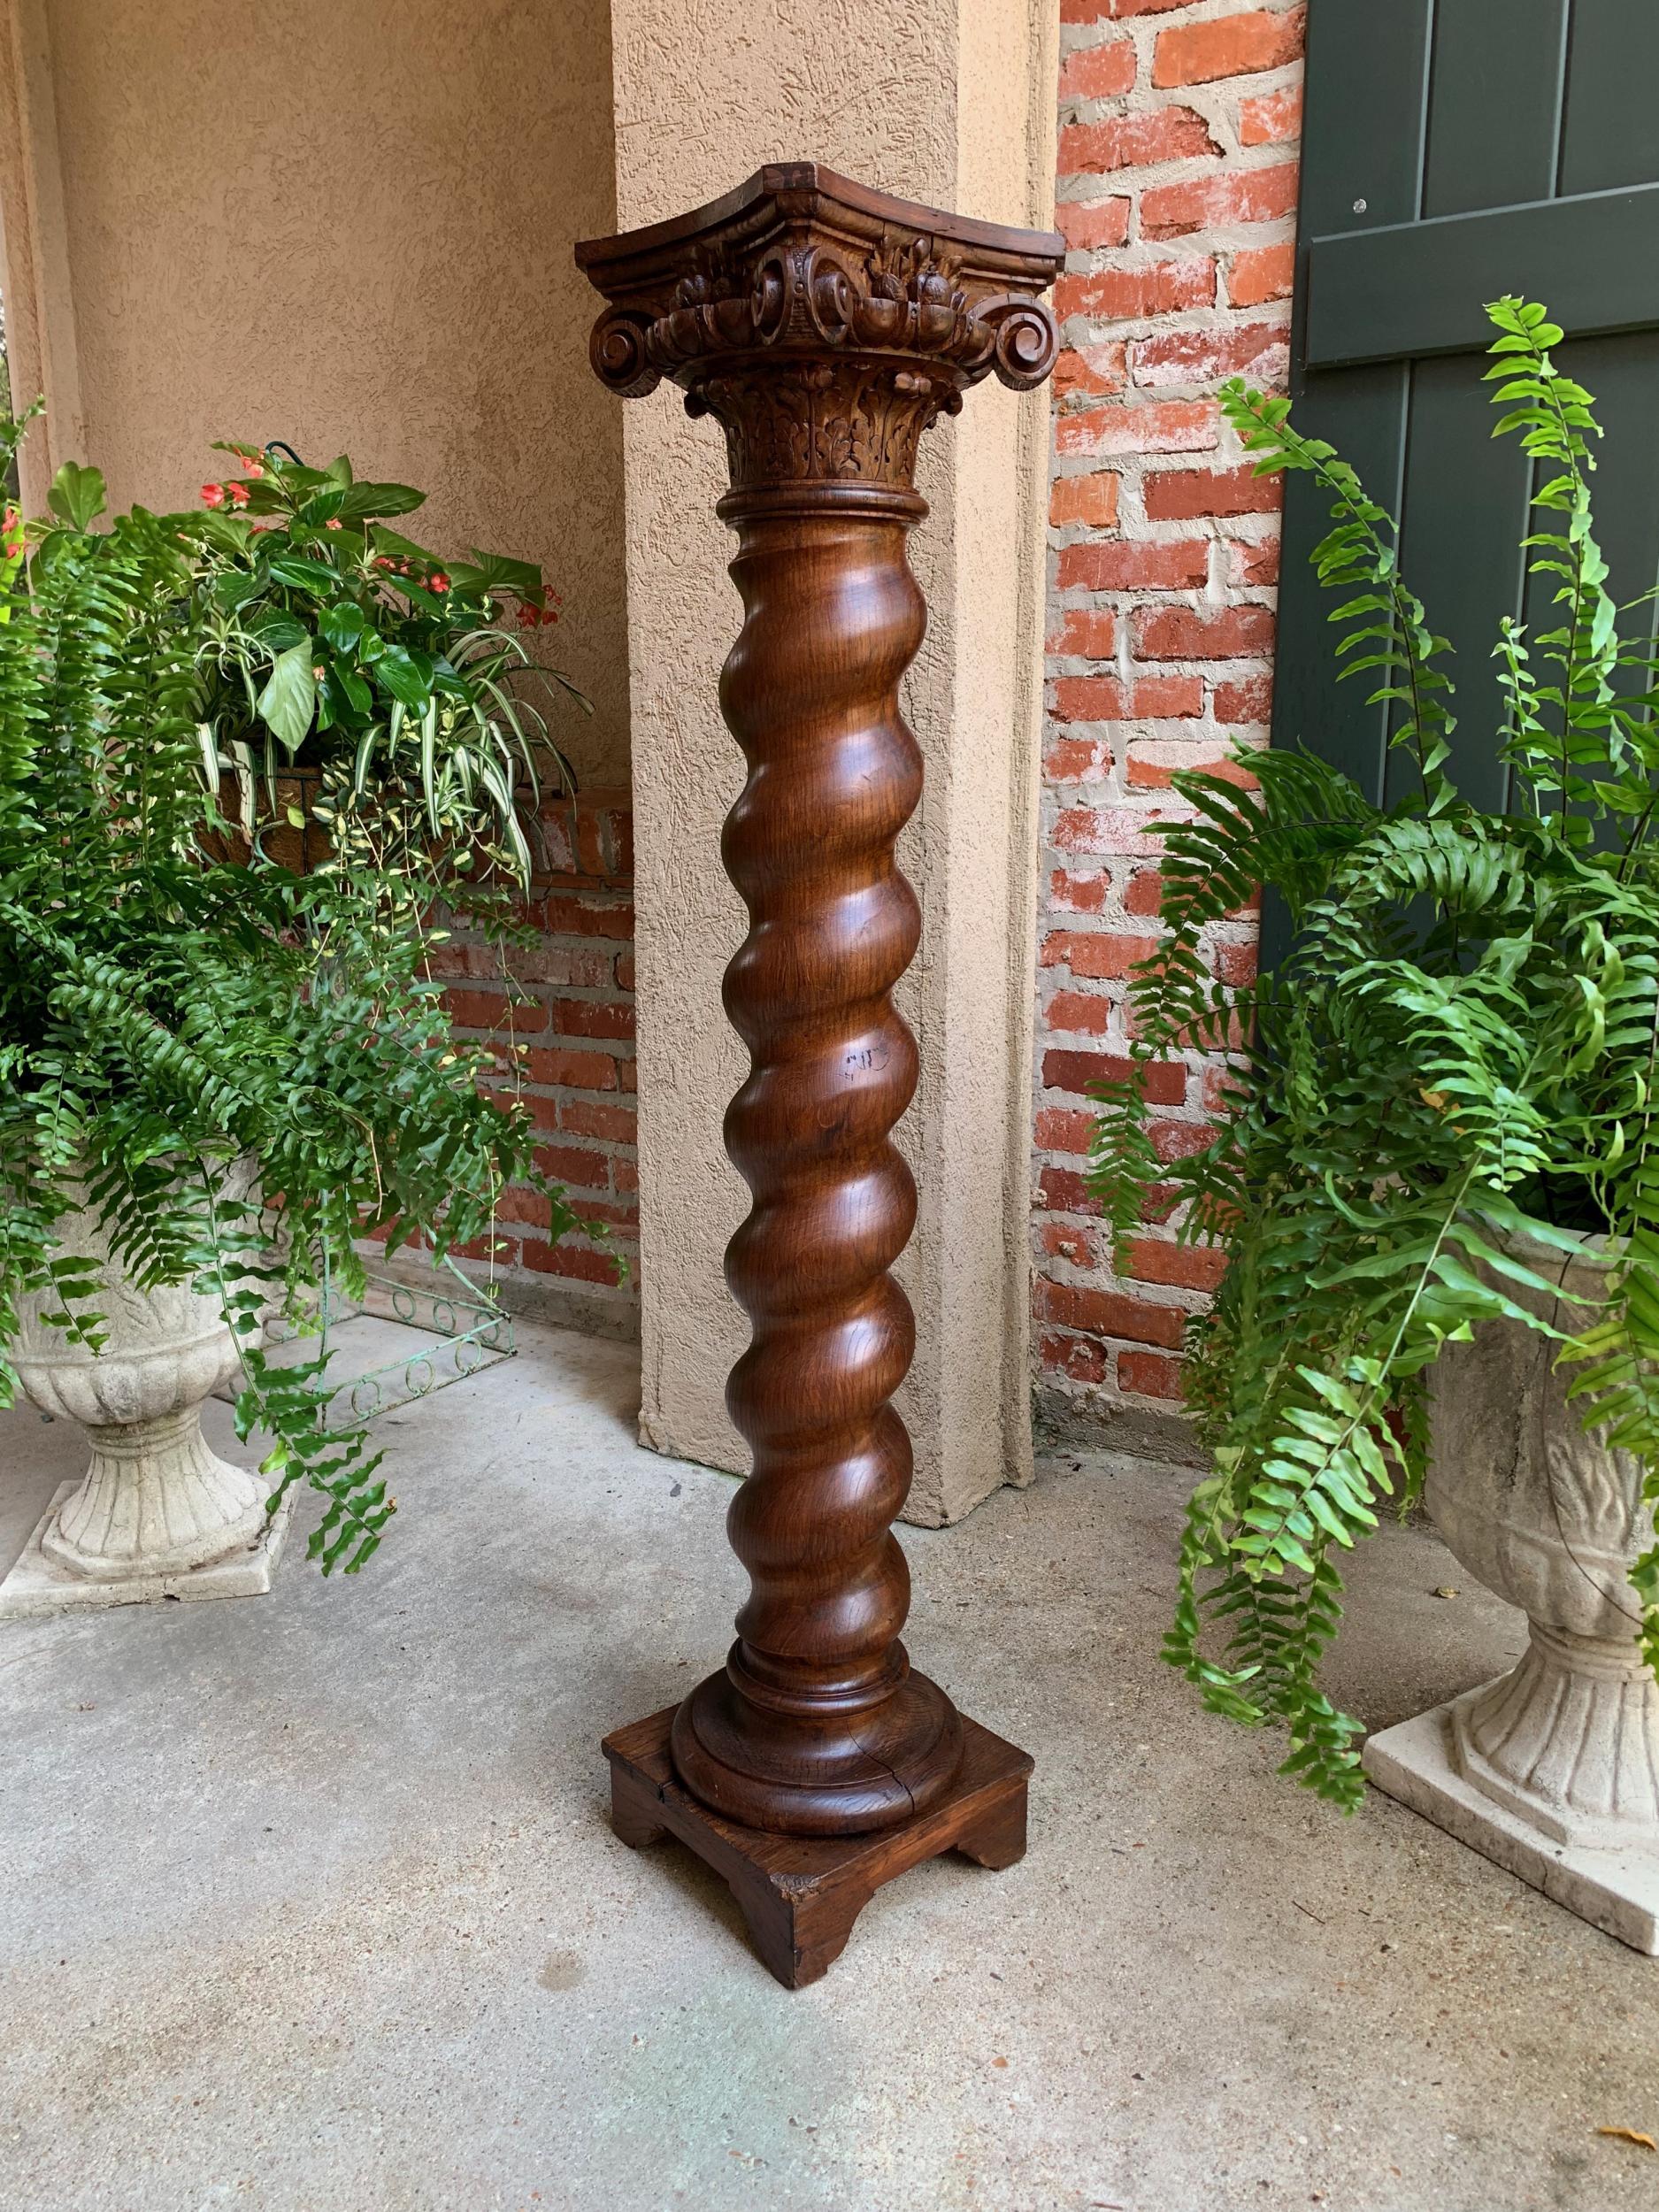 19th century French Carved Oak Barley Twist Column Pedestal Plant Stand Display.

~Direct from France~
~Gorgeous antique French barley twist column/pedestal stand.~
~Corinthian carved capital and thick barley twist column on a square